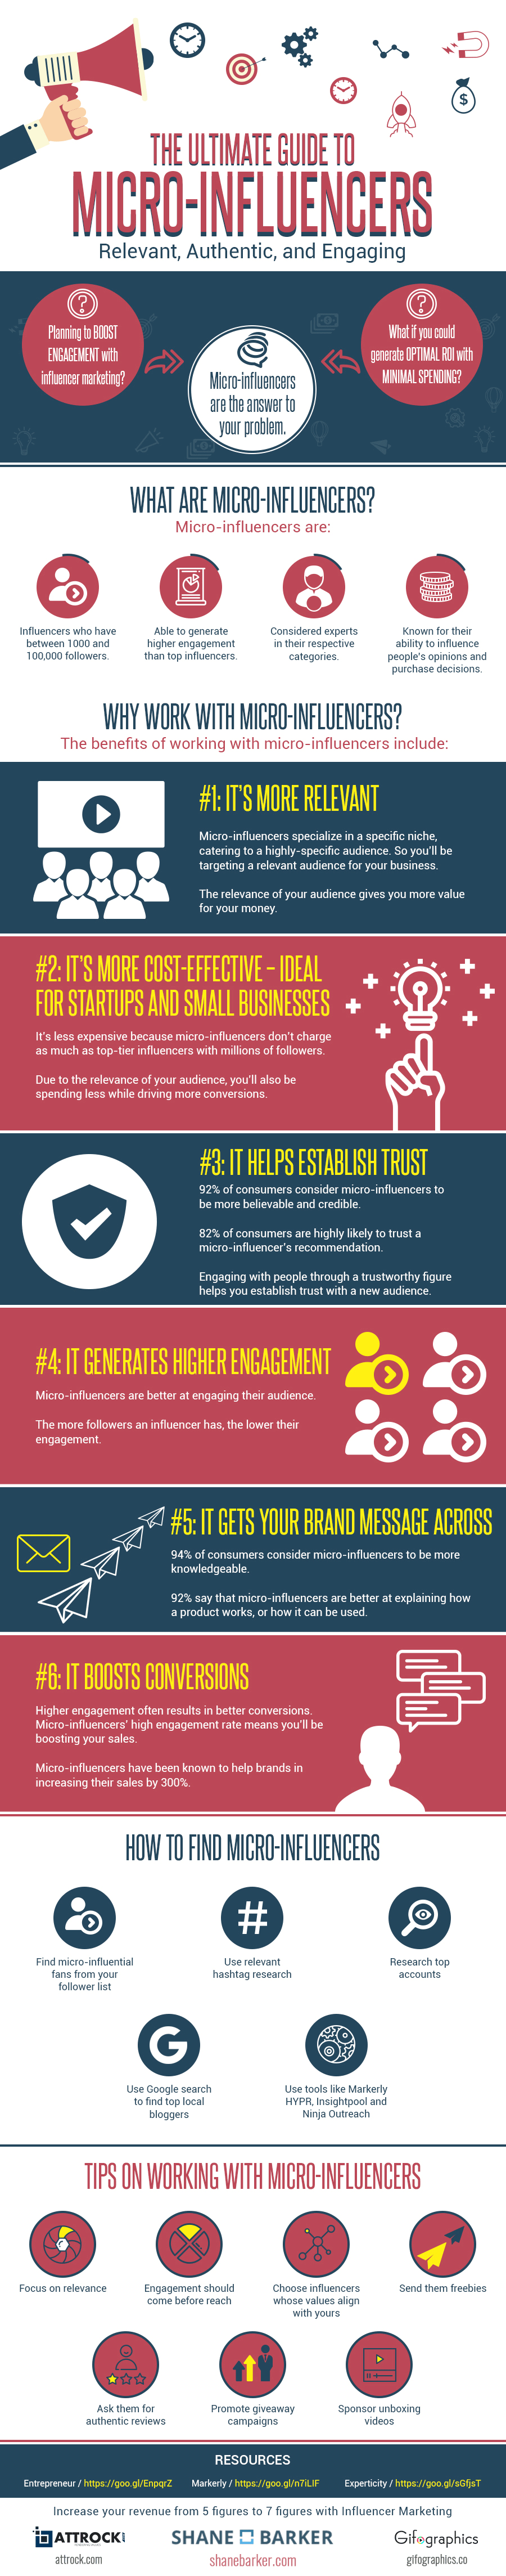 Using Micro-Influencers-Gifographic